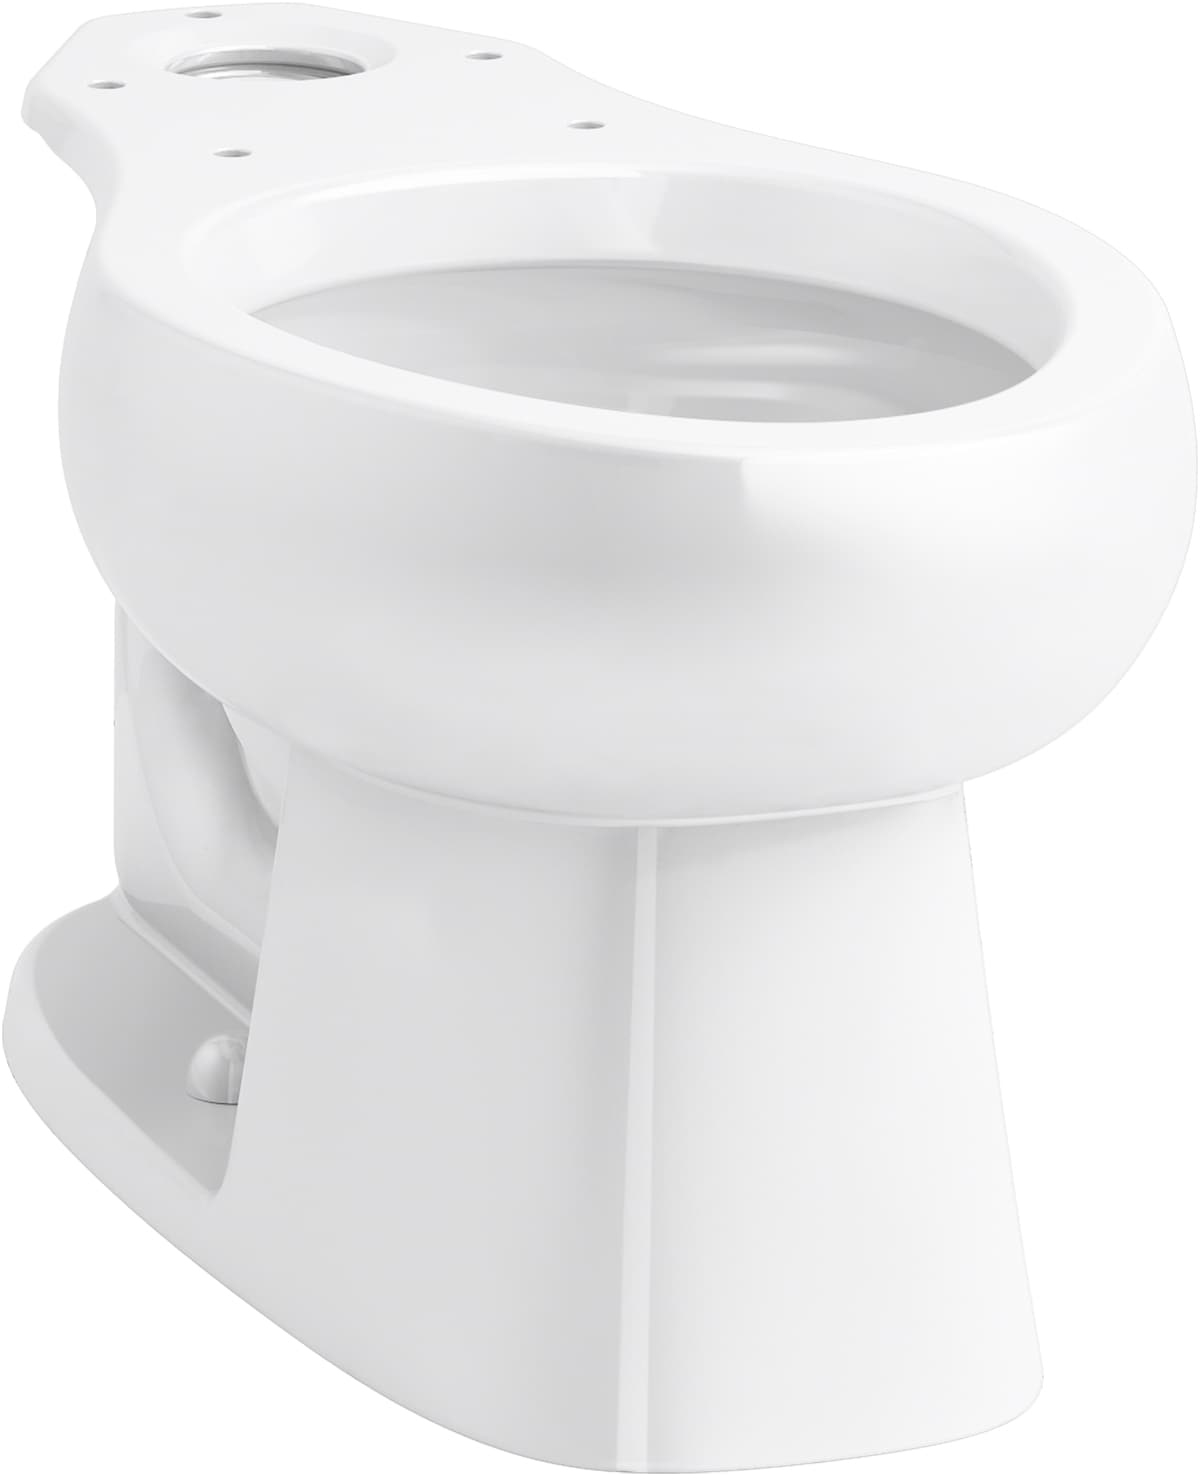 Windham White Elongated Chair Height Toilet Bowl 12-in Rough-In | - KOHLER 403217-0